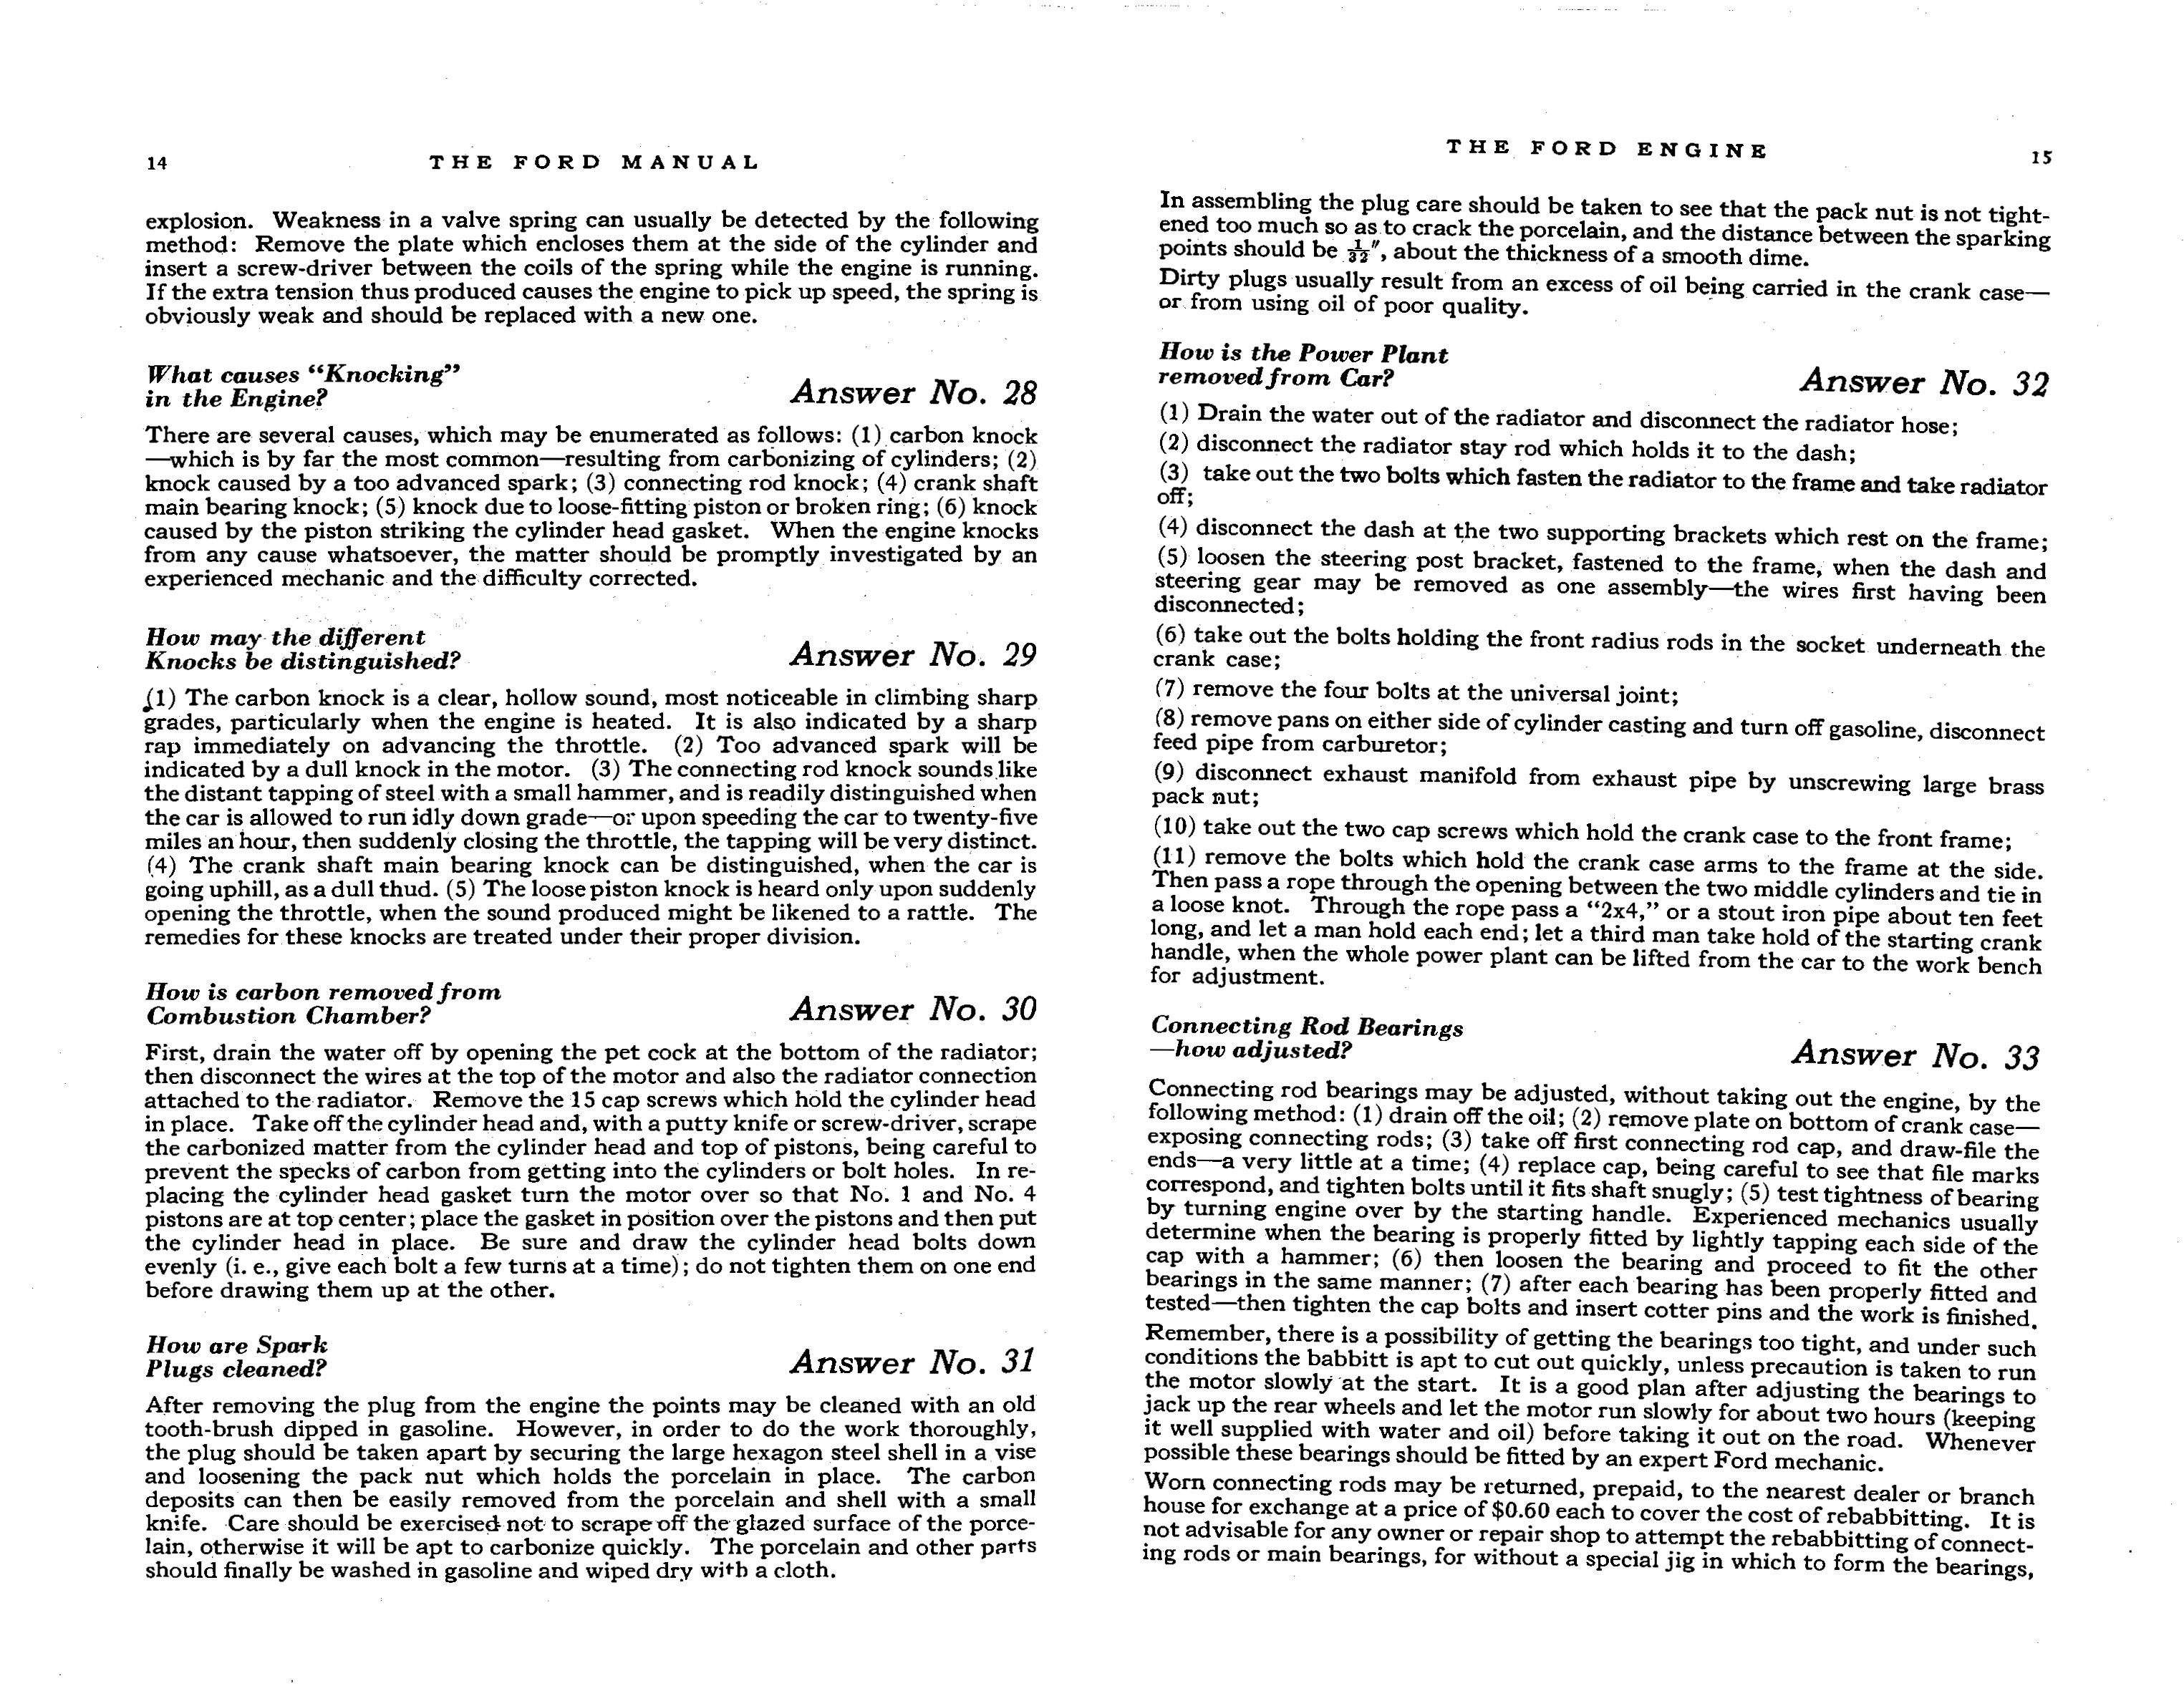 1925_Ford_Owners_Manual-14-15